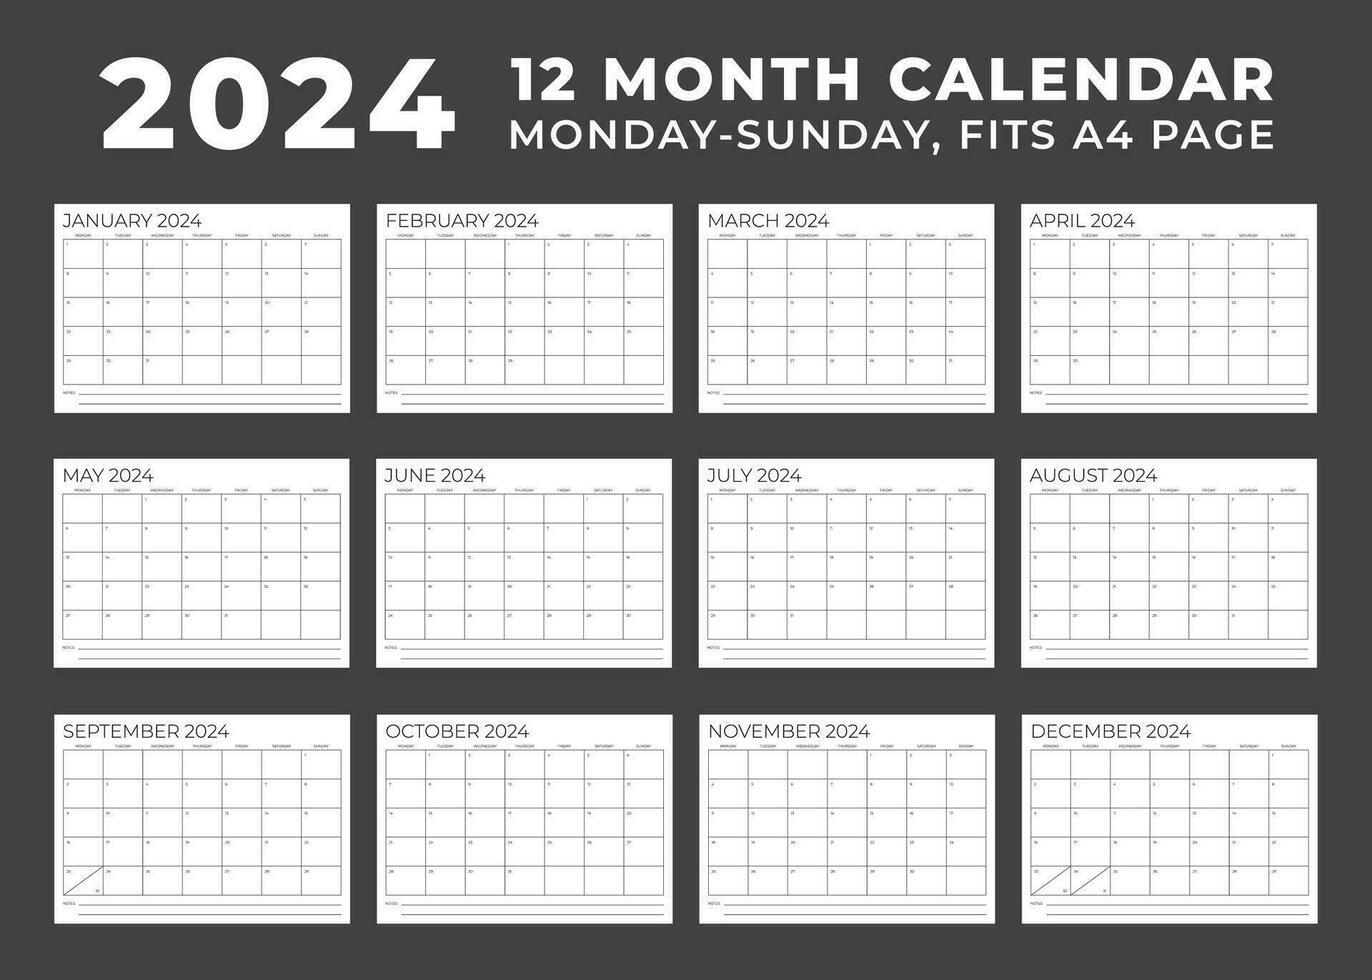 Calendar Template For 2024. Monday To Sunday. 12 Month Calendar | Printable Calendar 2024 Monday To Sunday